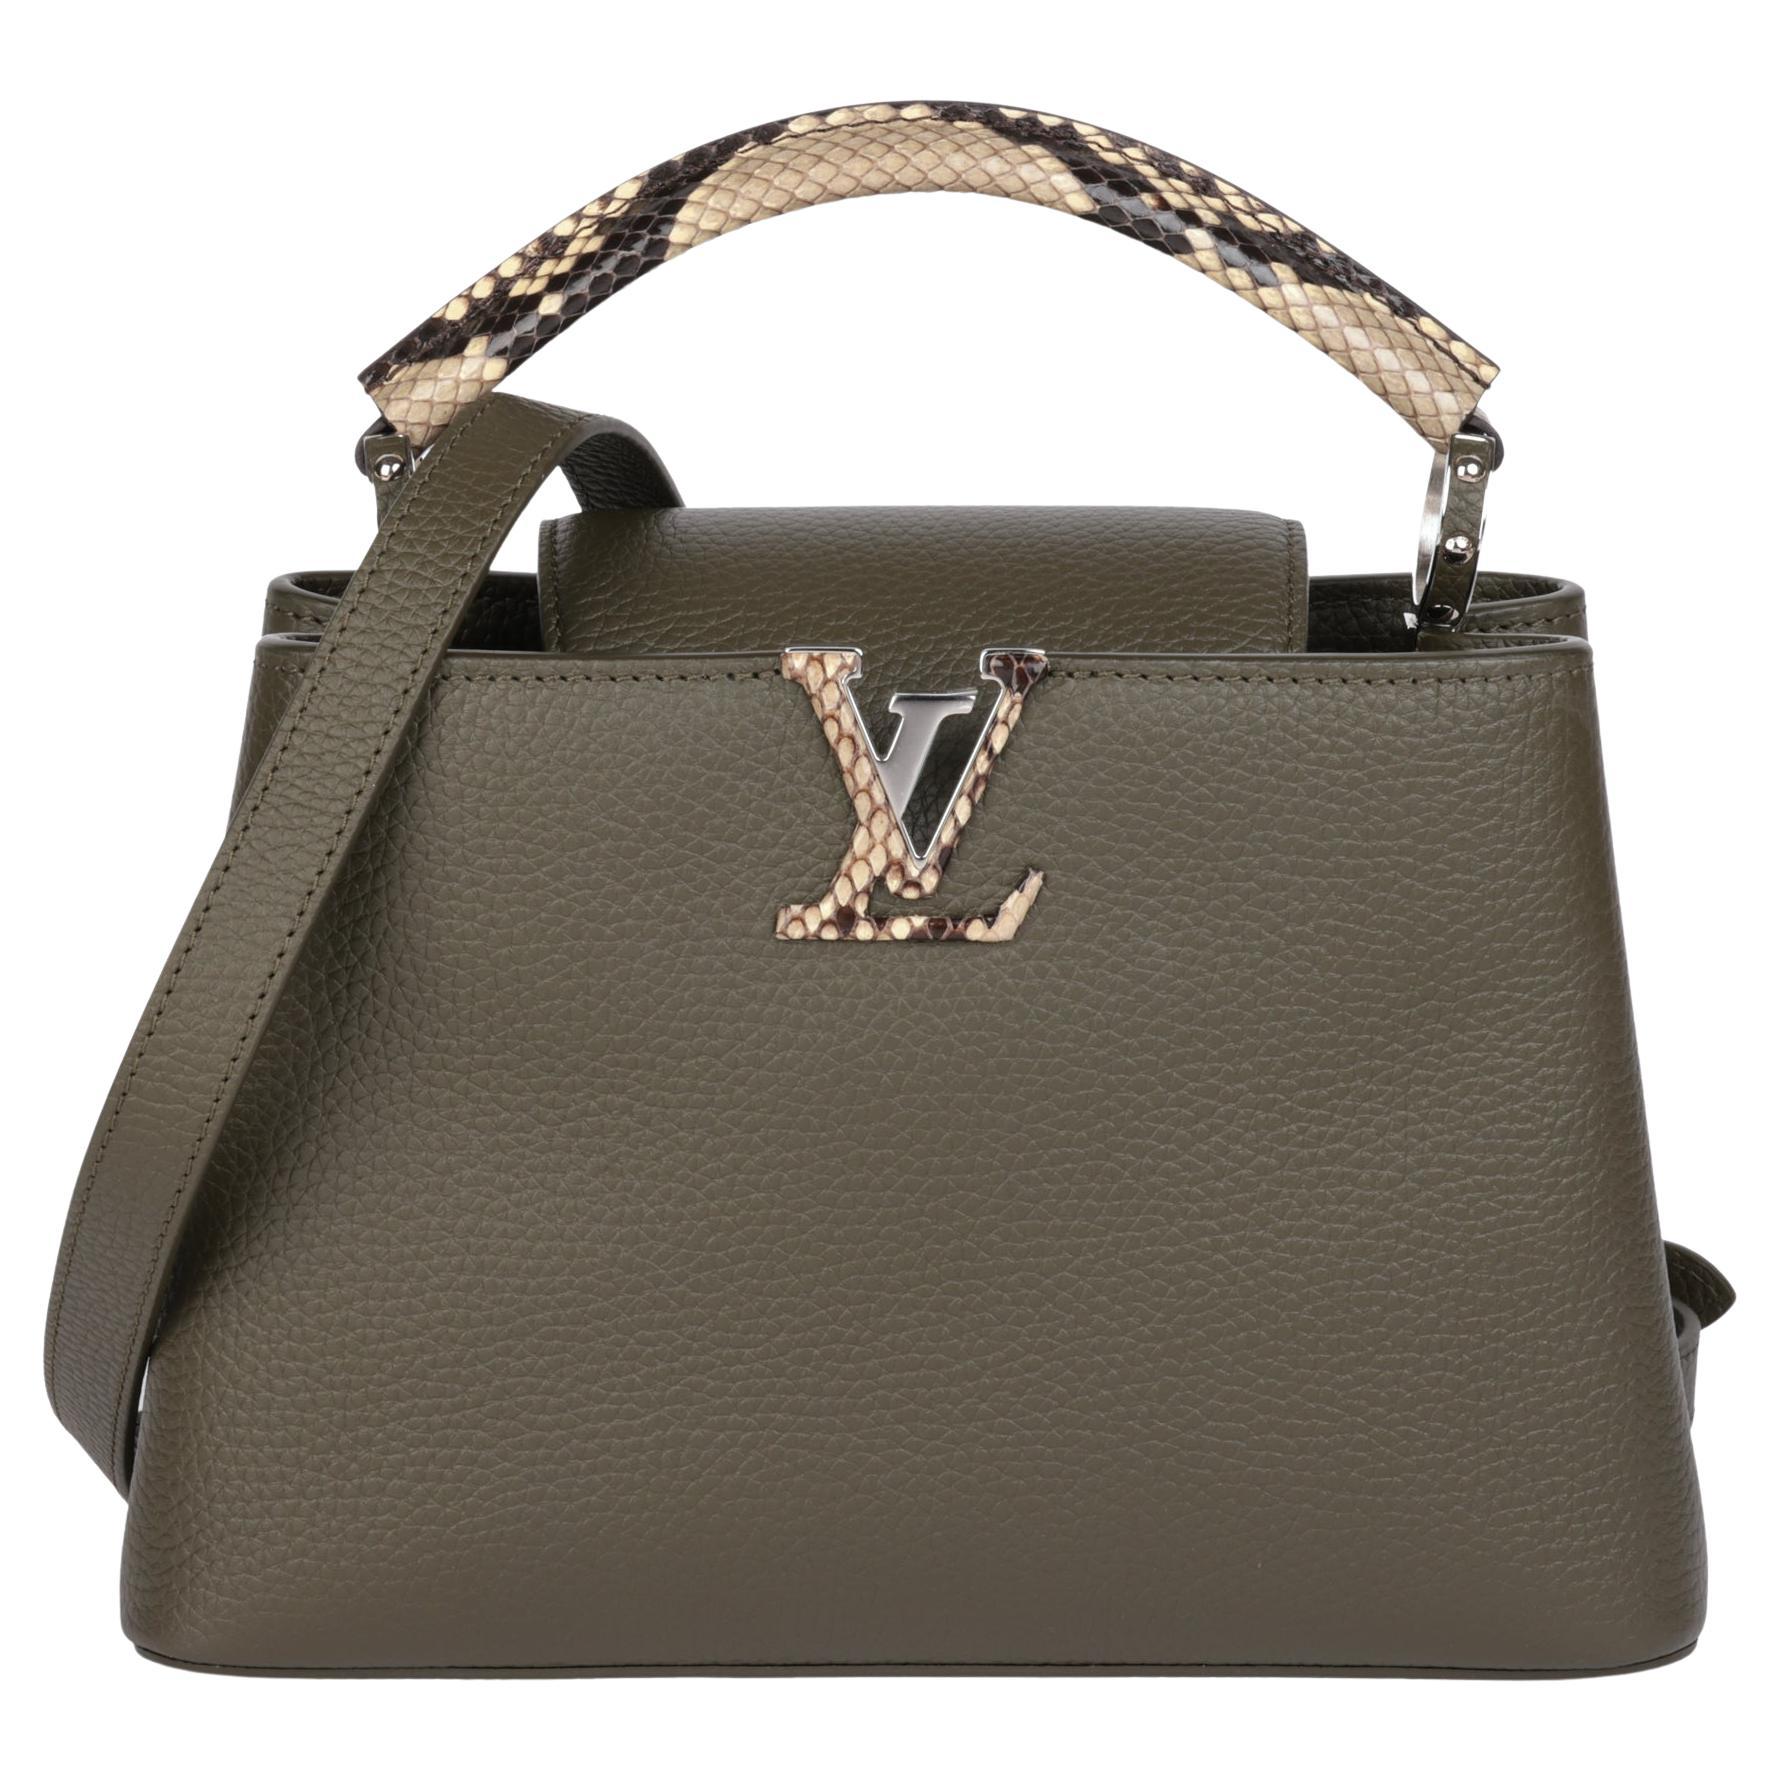 Louis Vuitton Capucines Green - 2 For Sale on 1stDibs